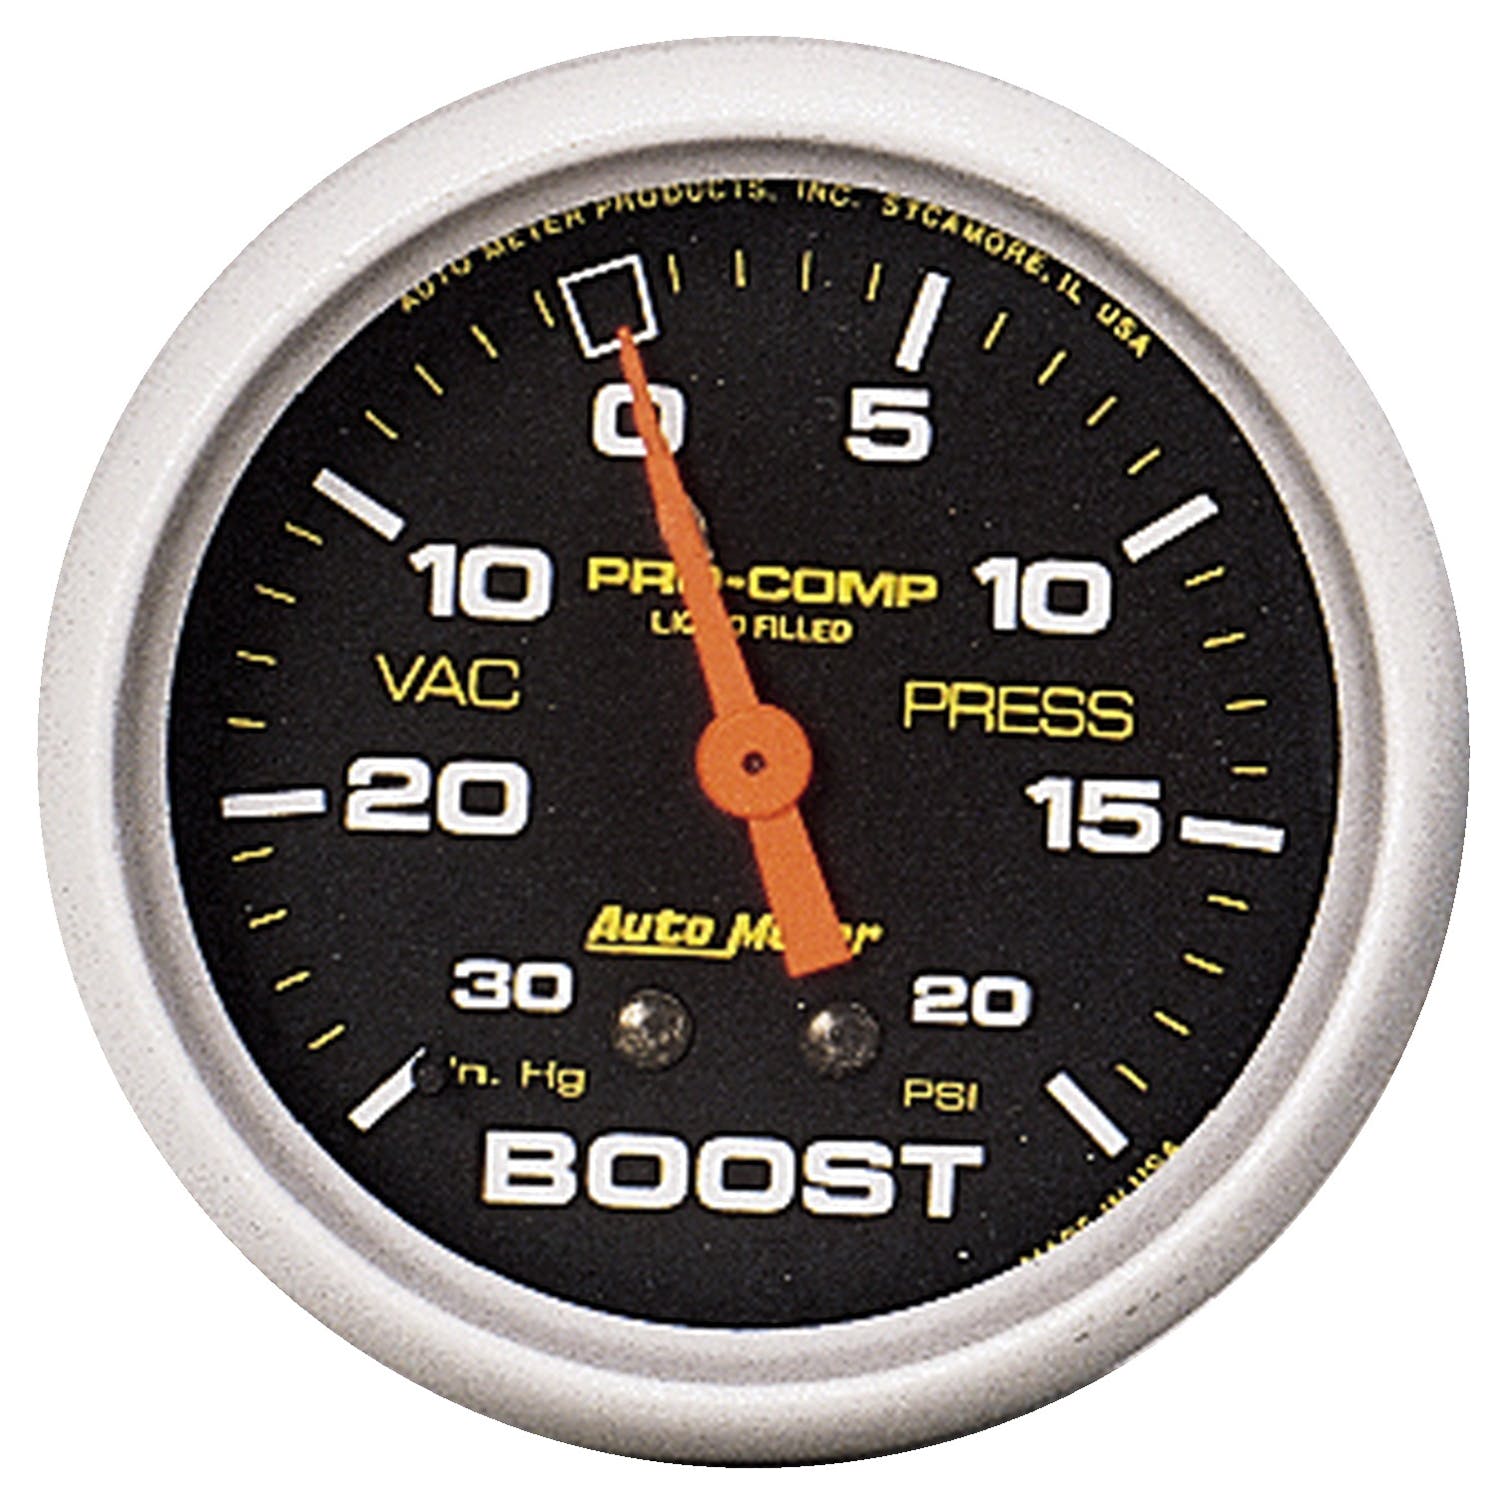 AutoMeter Products 5401 Boost Turbo 30 PSI